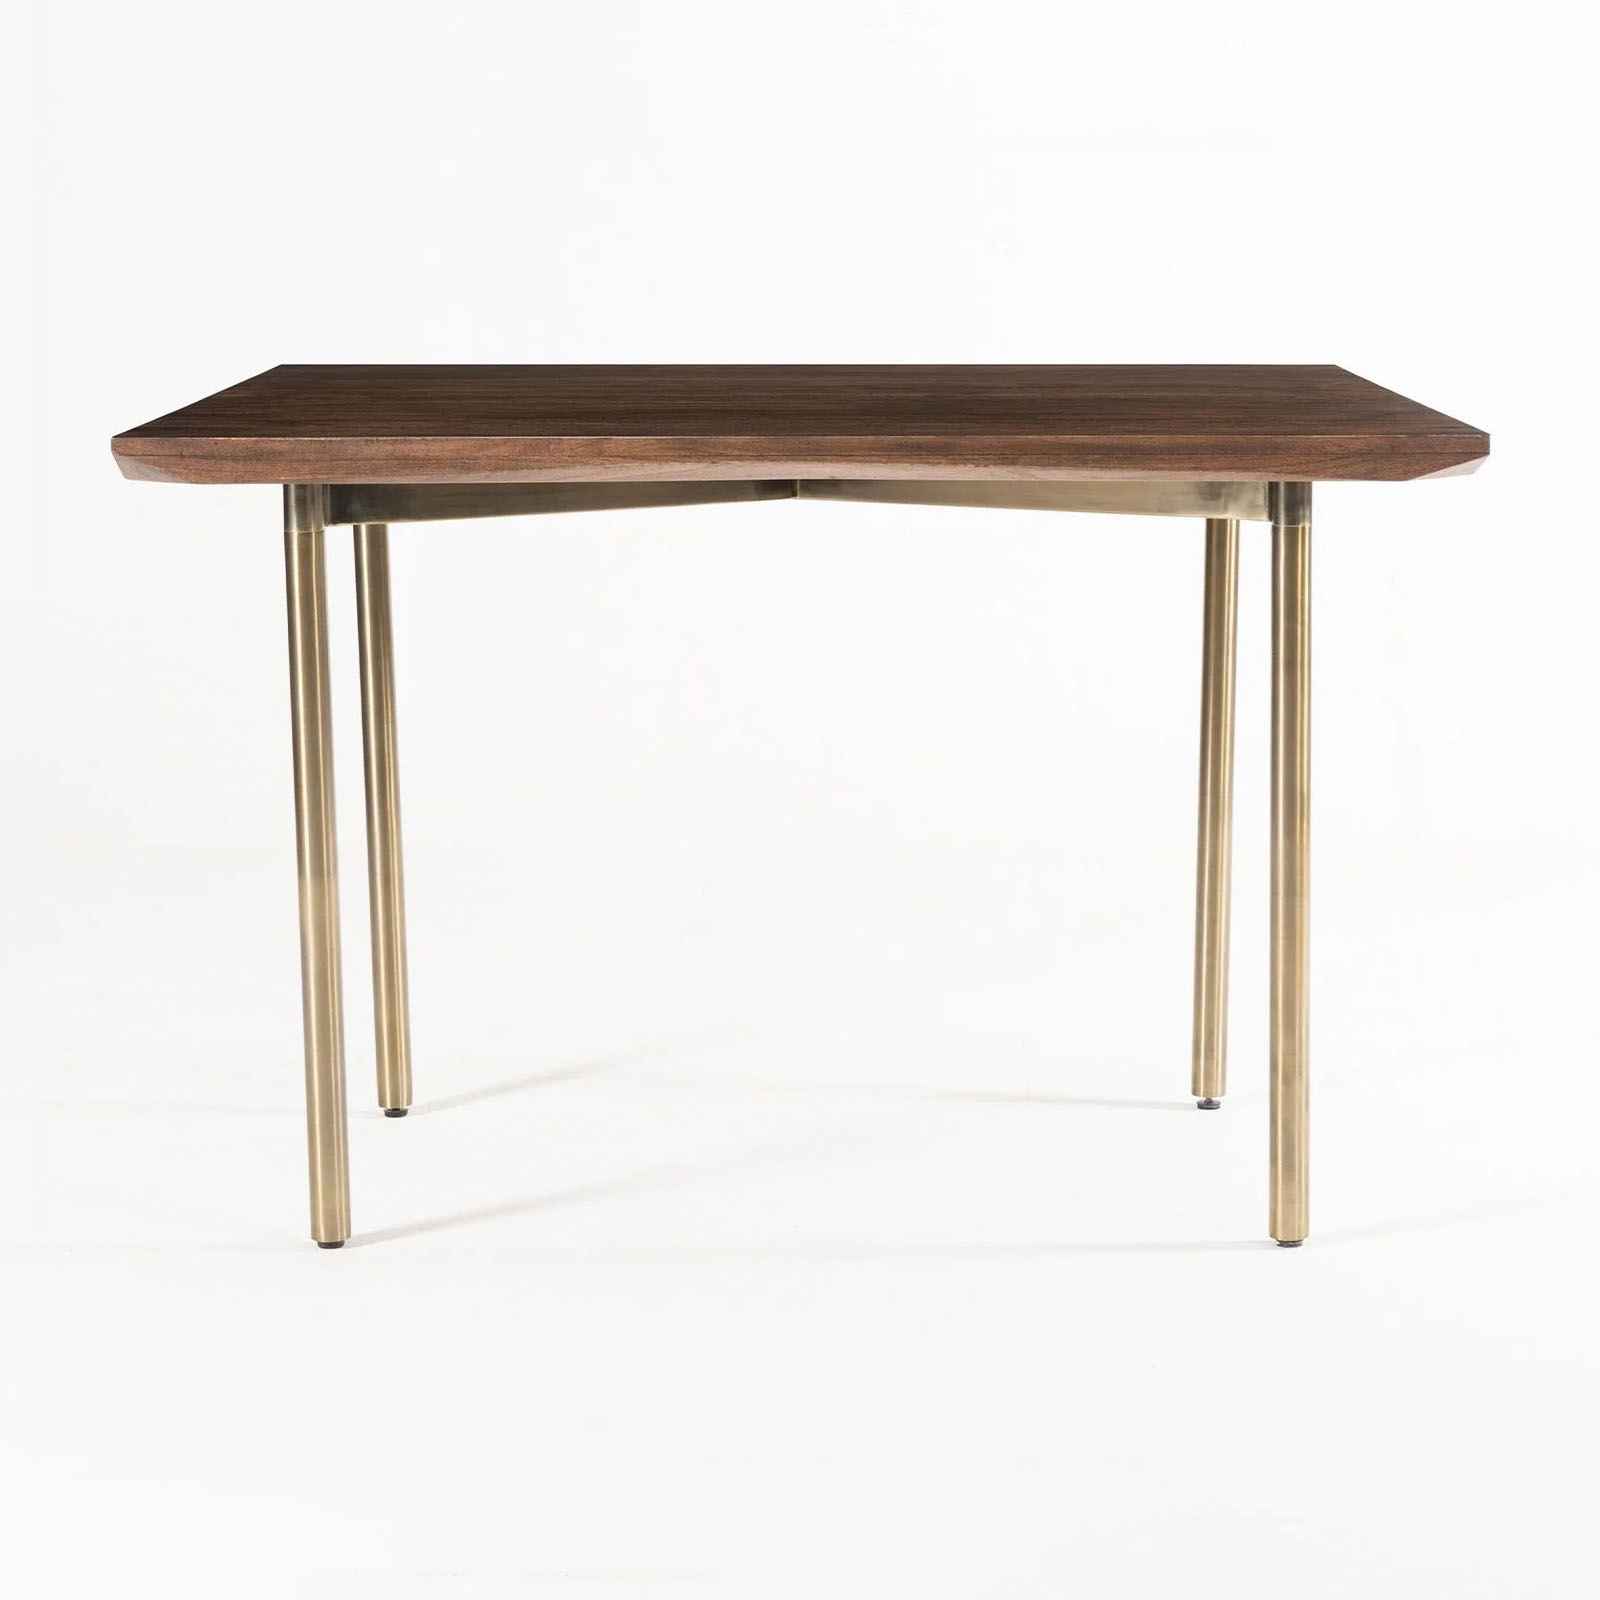 Mazi Dining Table 6 Seater